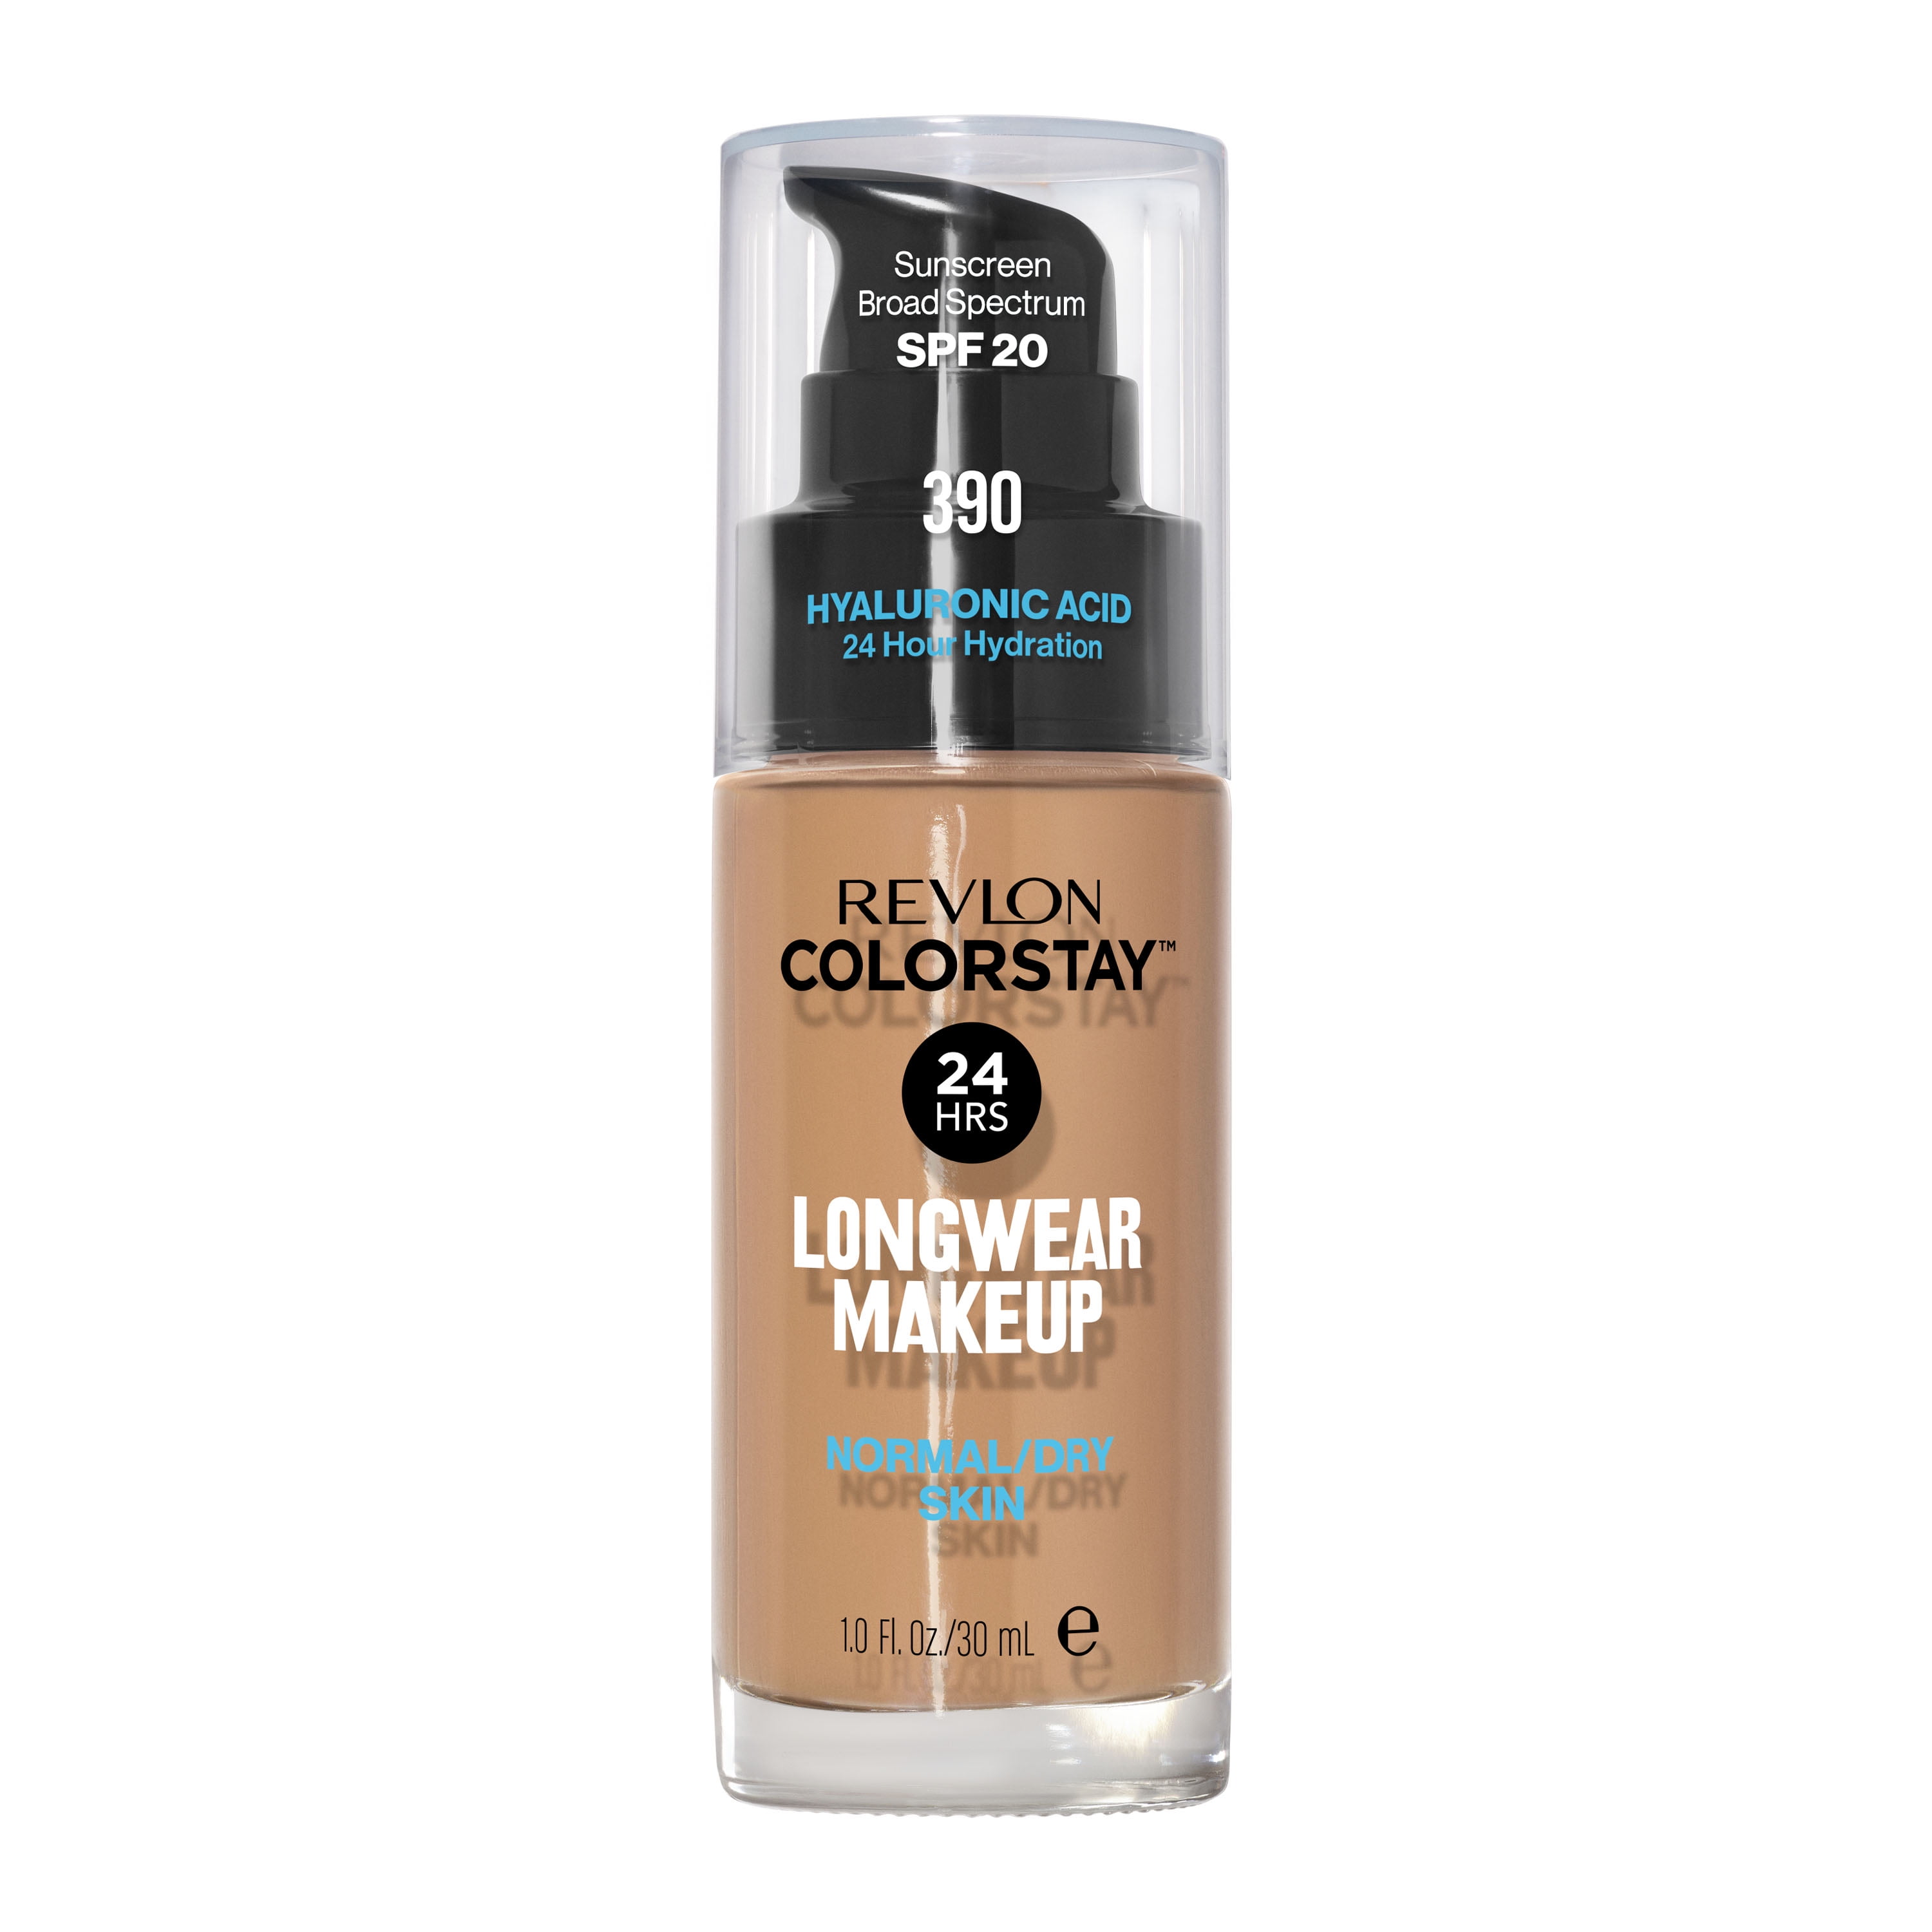 Revlon ColorStay Face Makeup for Normal and Dry Skin, SPF 20, Longwear Medium-Full Coverage with Matte Finish, Oil Free, 390 Rich Maple